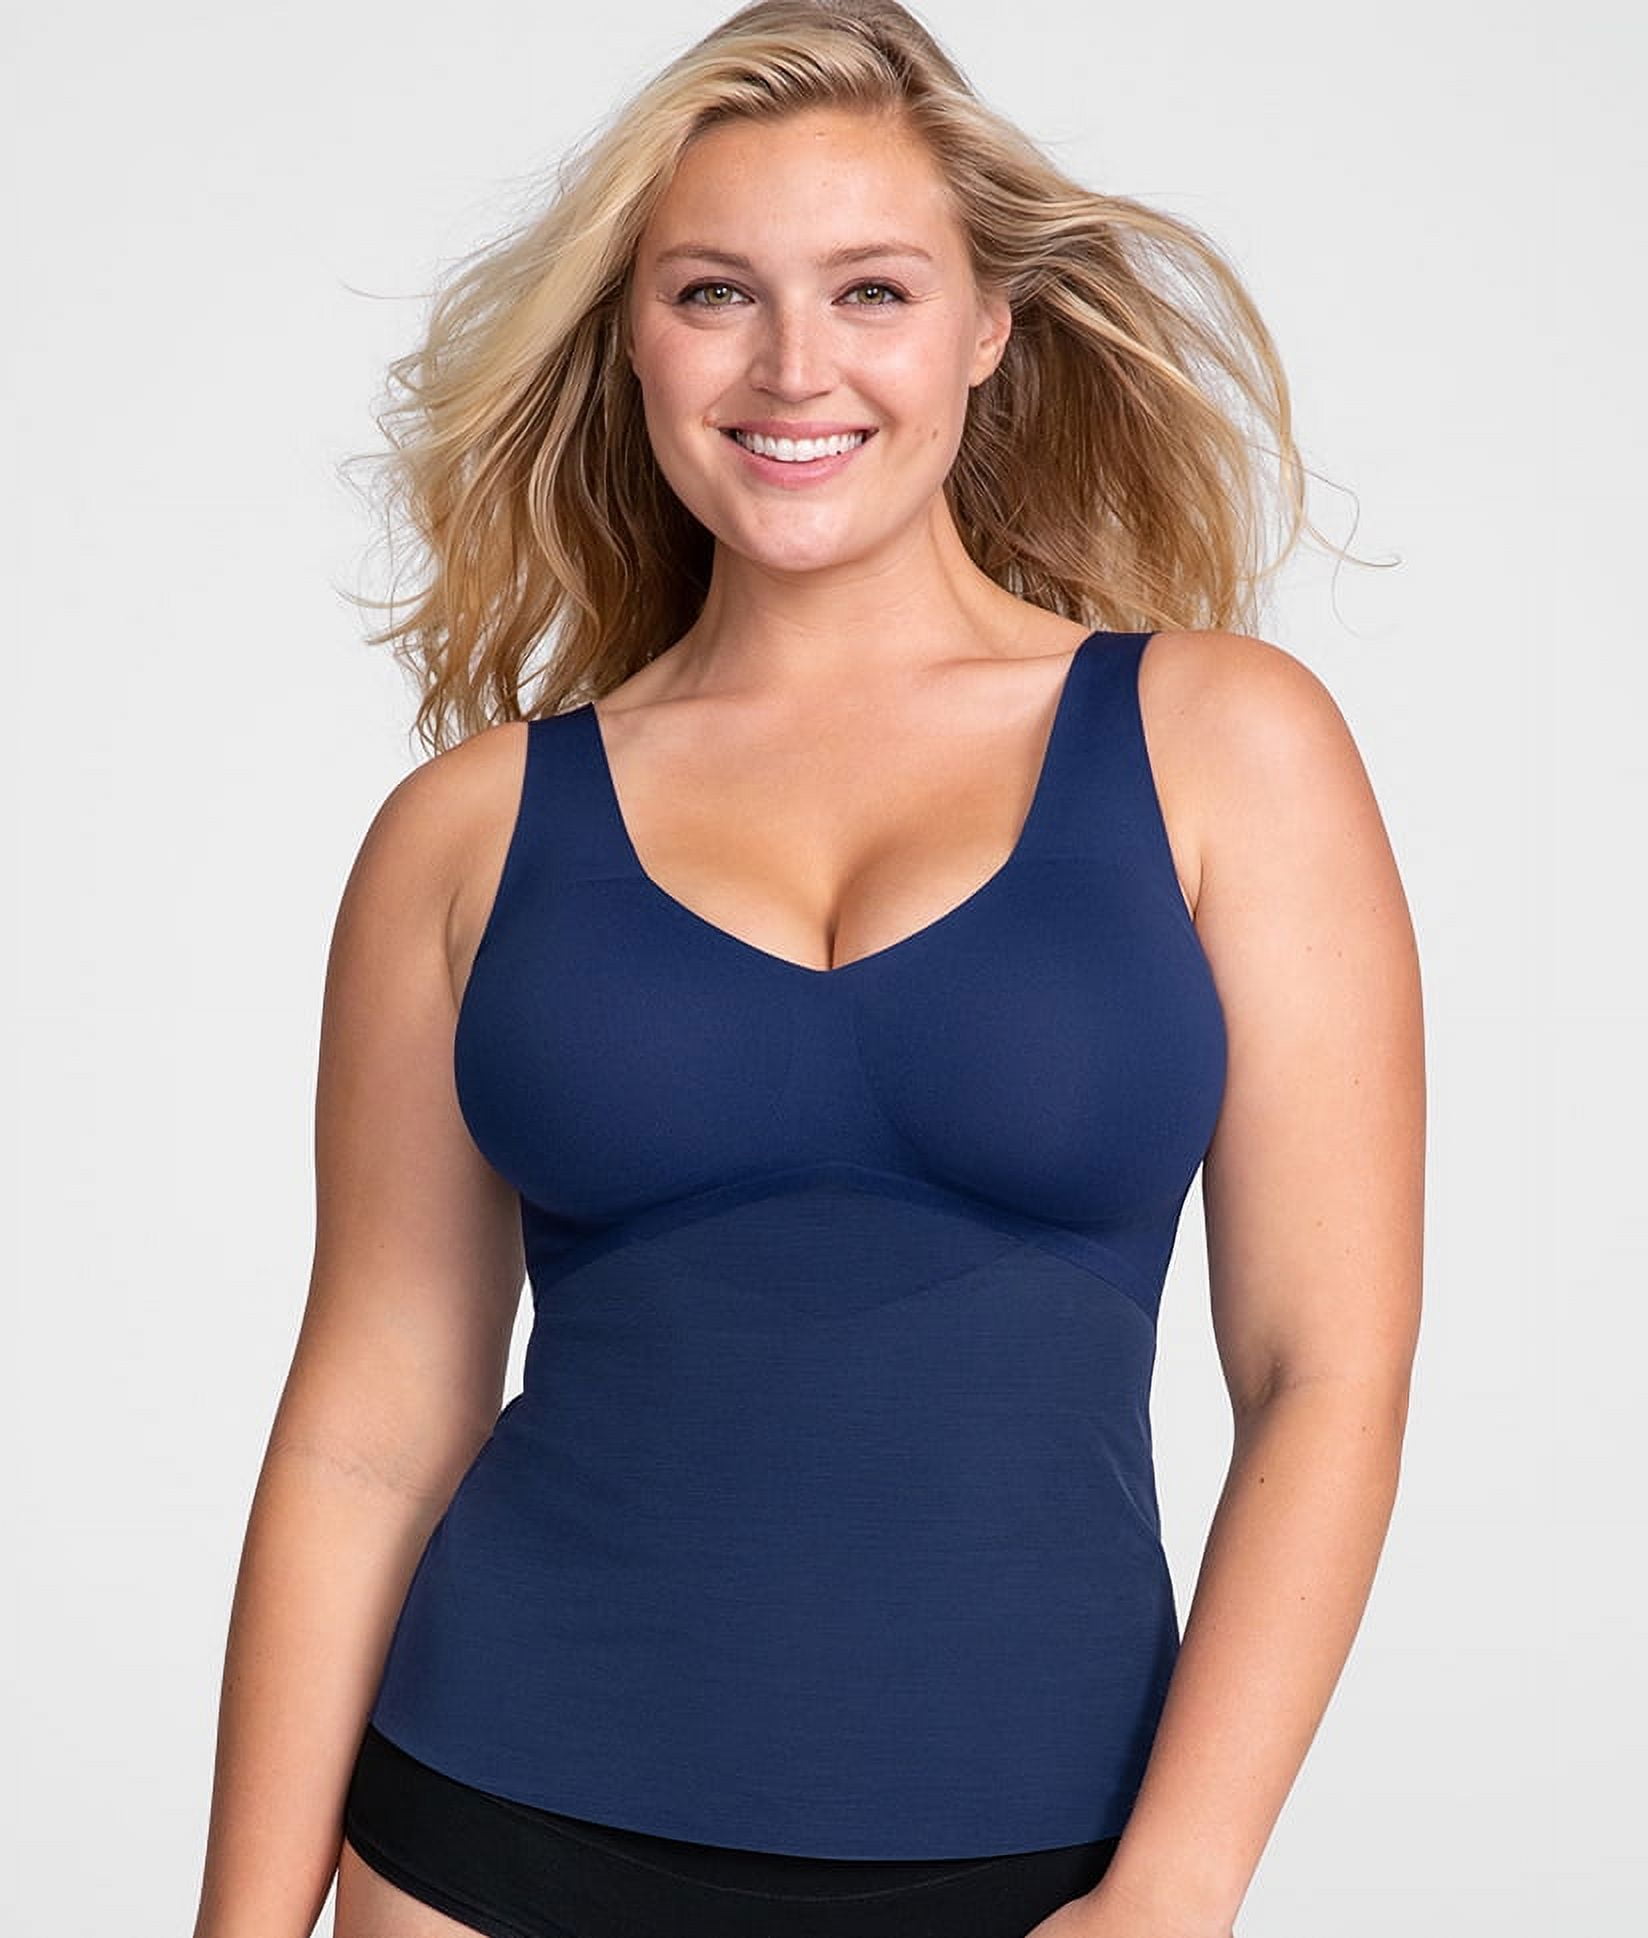 Honeylove Liftwear Cami Tan Size L - $32 (61% Off Retail) - From